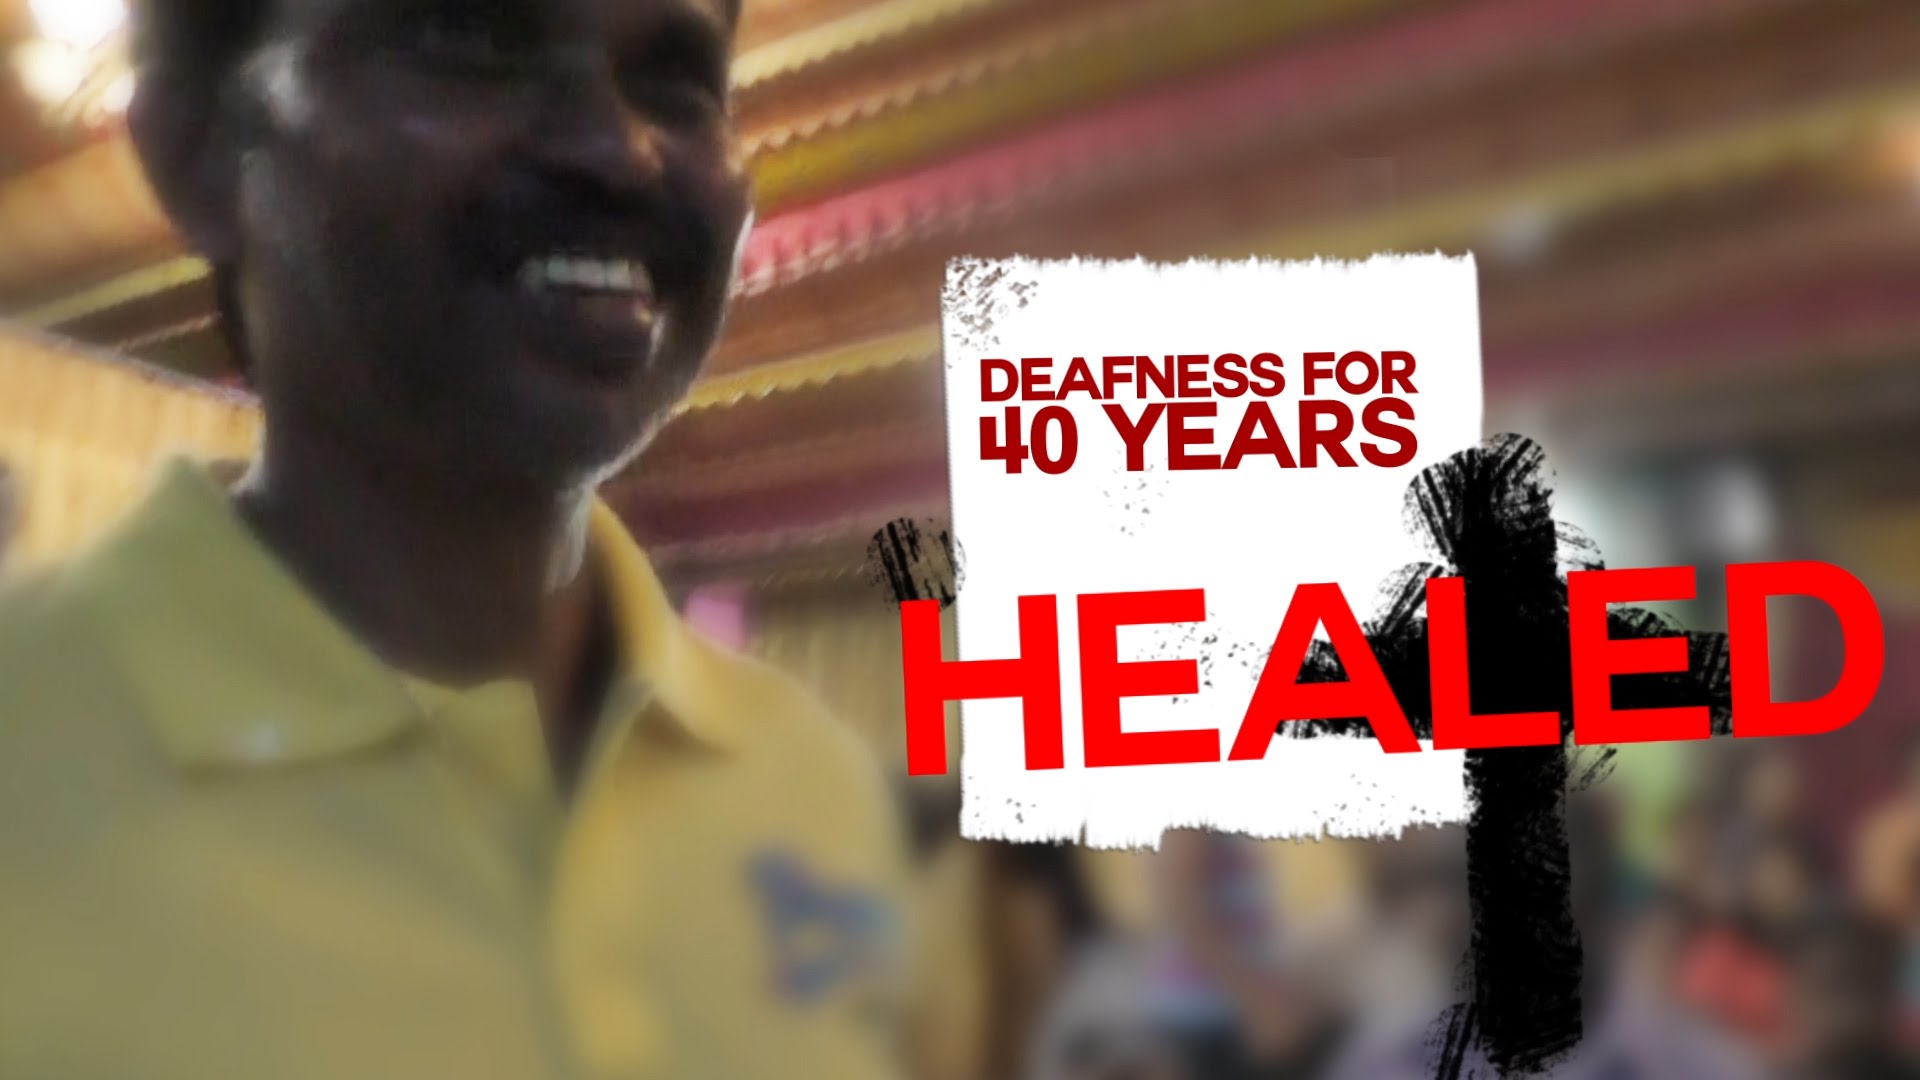 WOW HEALING DIARIES – DEAFNESS LEAVES AFTER 40 YEARS!